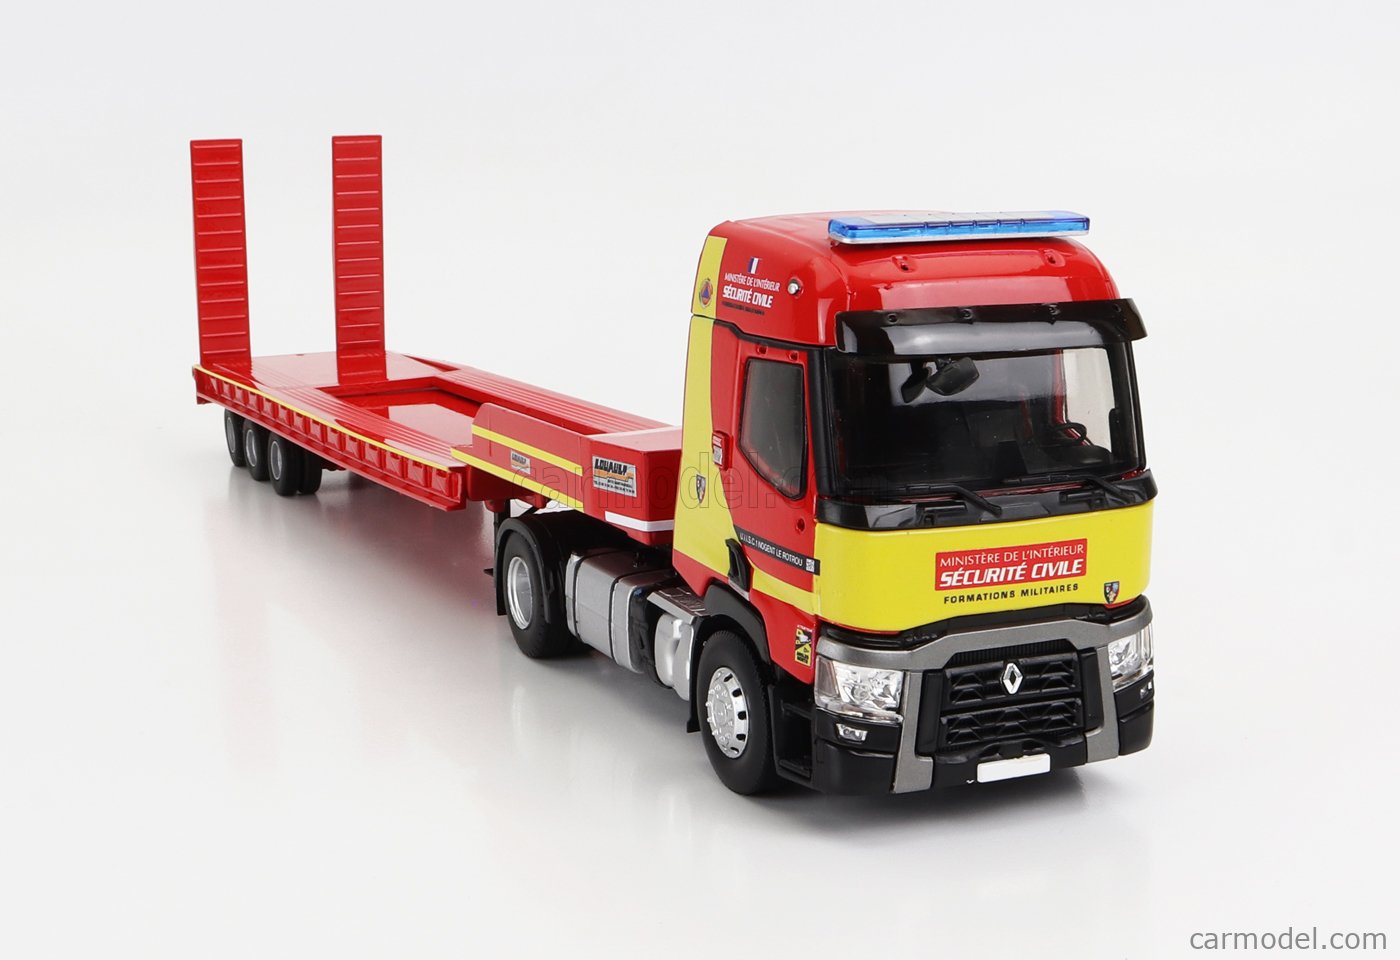 ELIGOR 117204 Масштаб 1/43  RENAULT T460 TRUCK PIANALE SECURITE CIVILE 2018 RED YELLOW